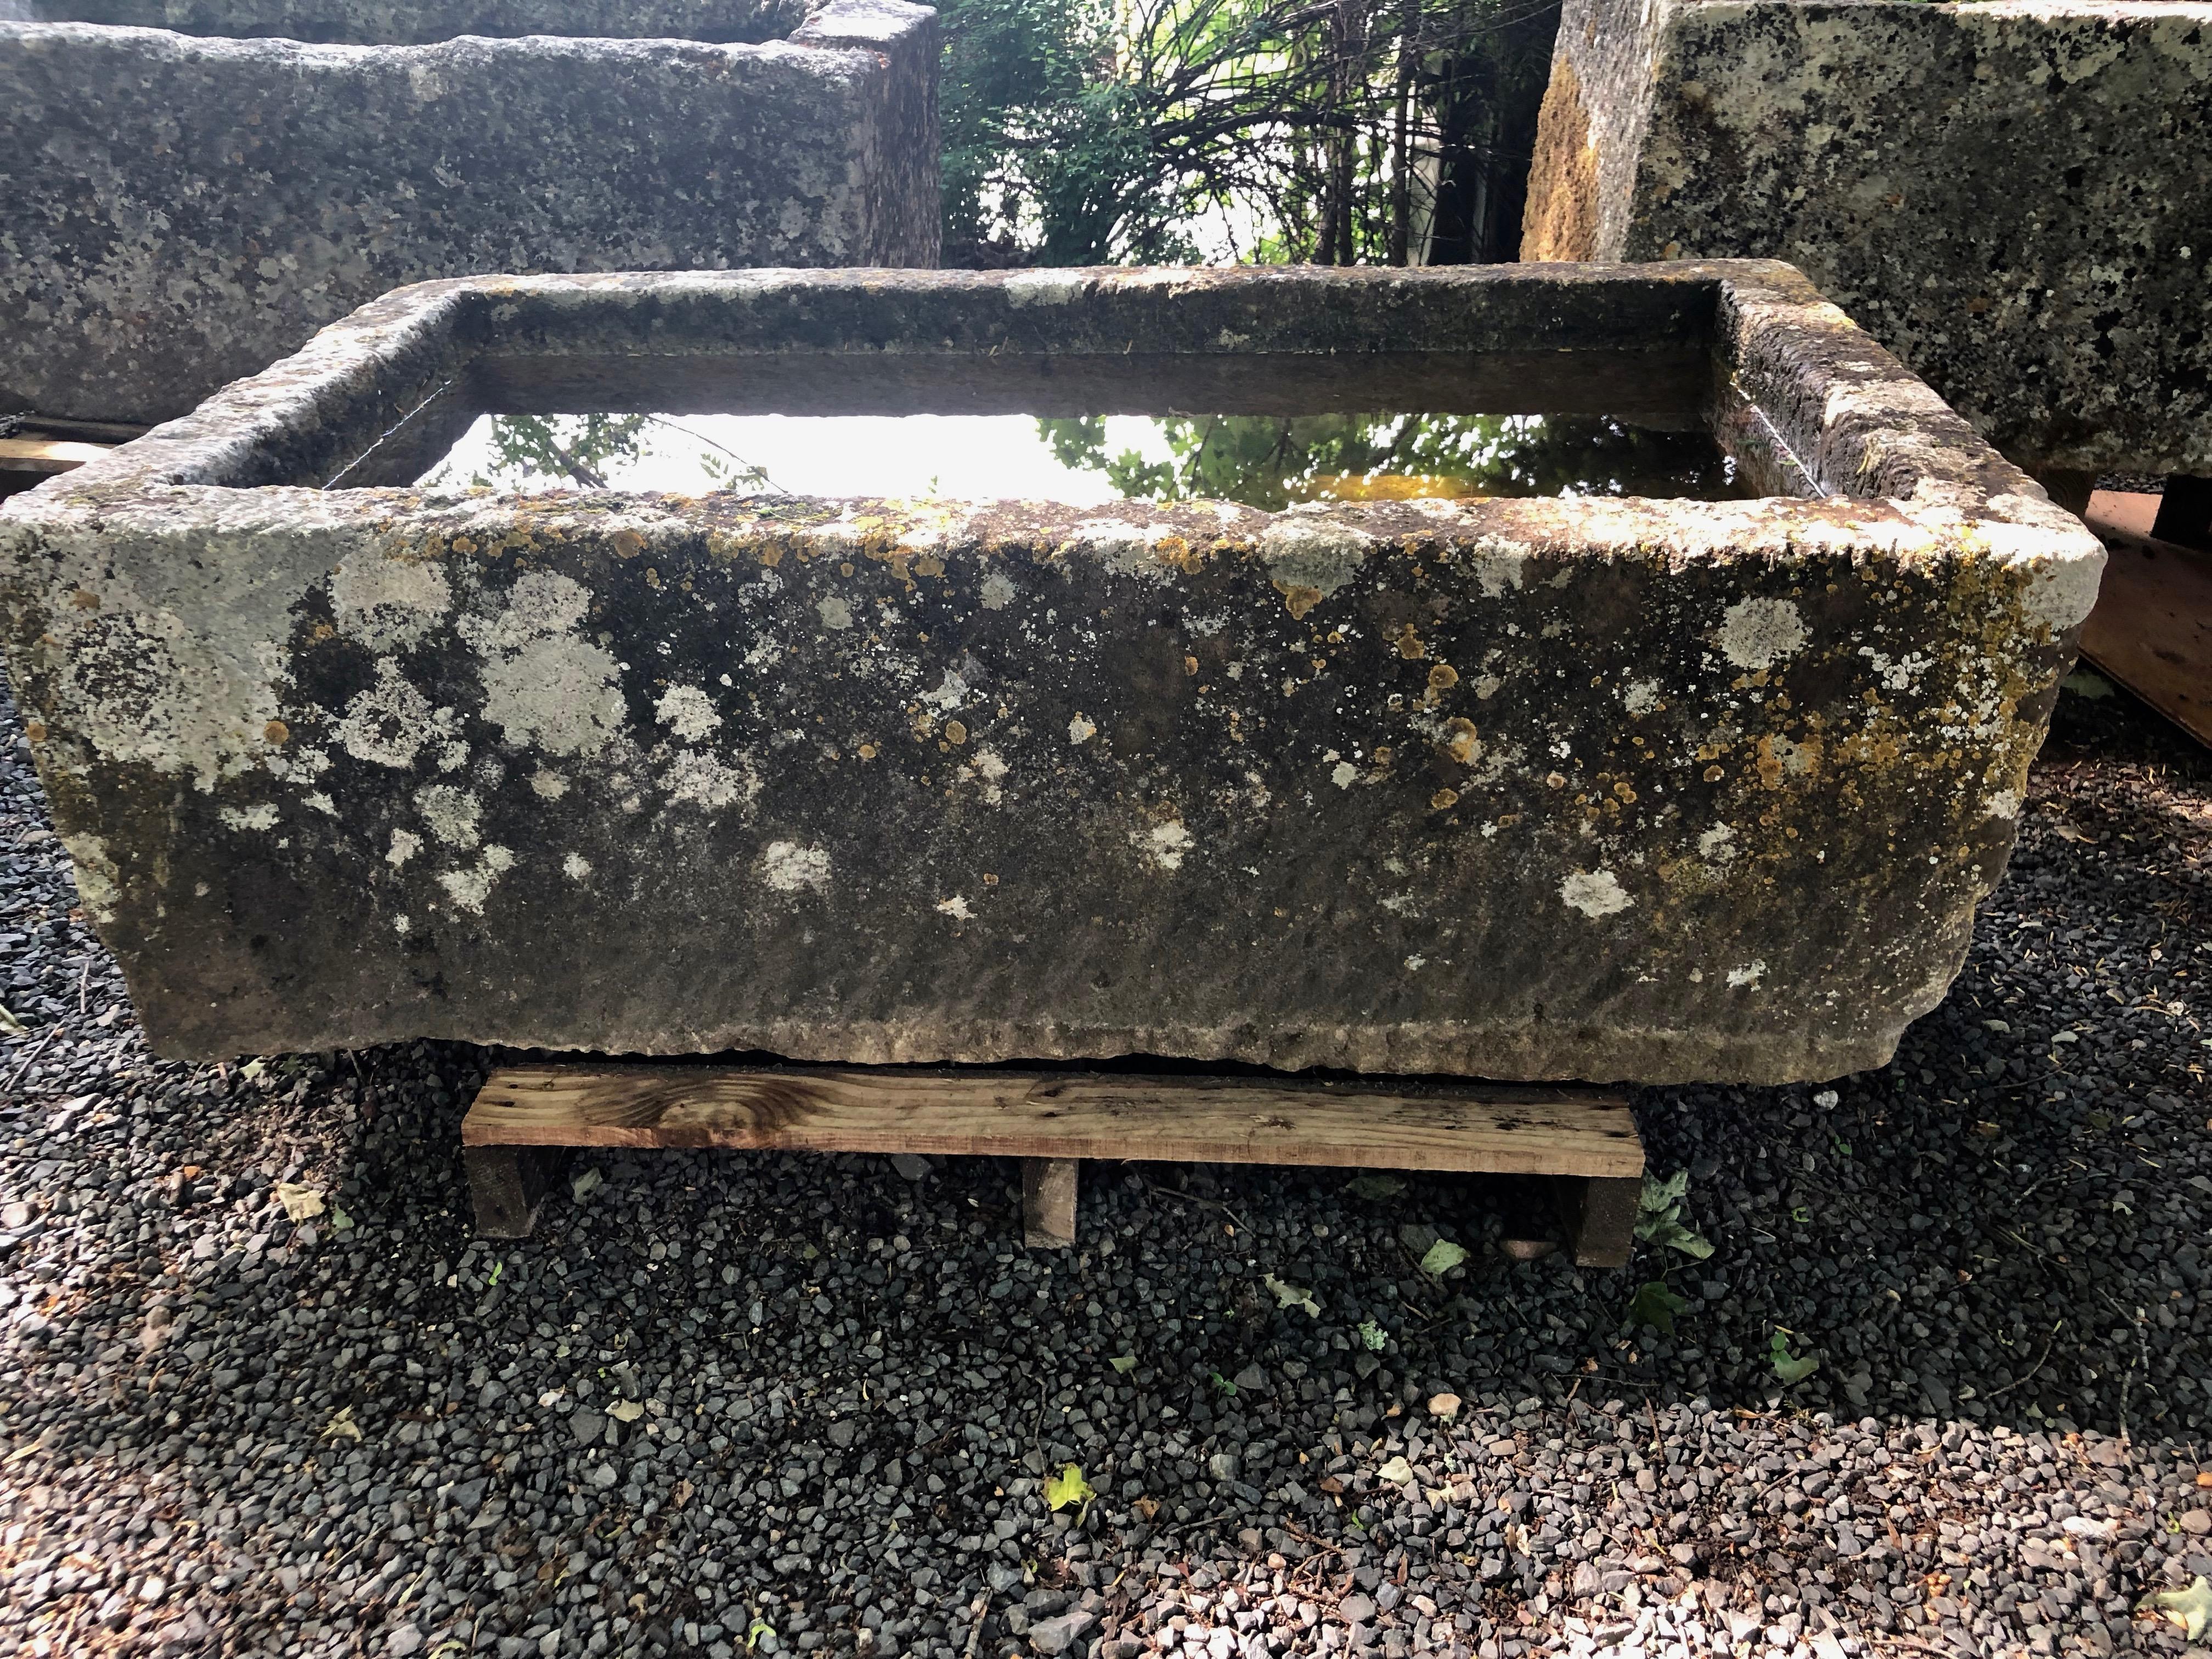 One of the finest troughs sourced on our most recent buying trip to France, this stunning hand carved limestone trough is in excellent antique condition and features a fabulous patina with heavy lichen in white, yellow and orange. It has no cracks